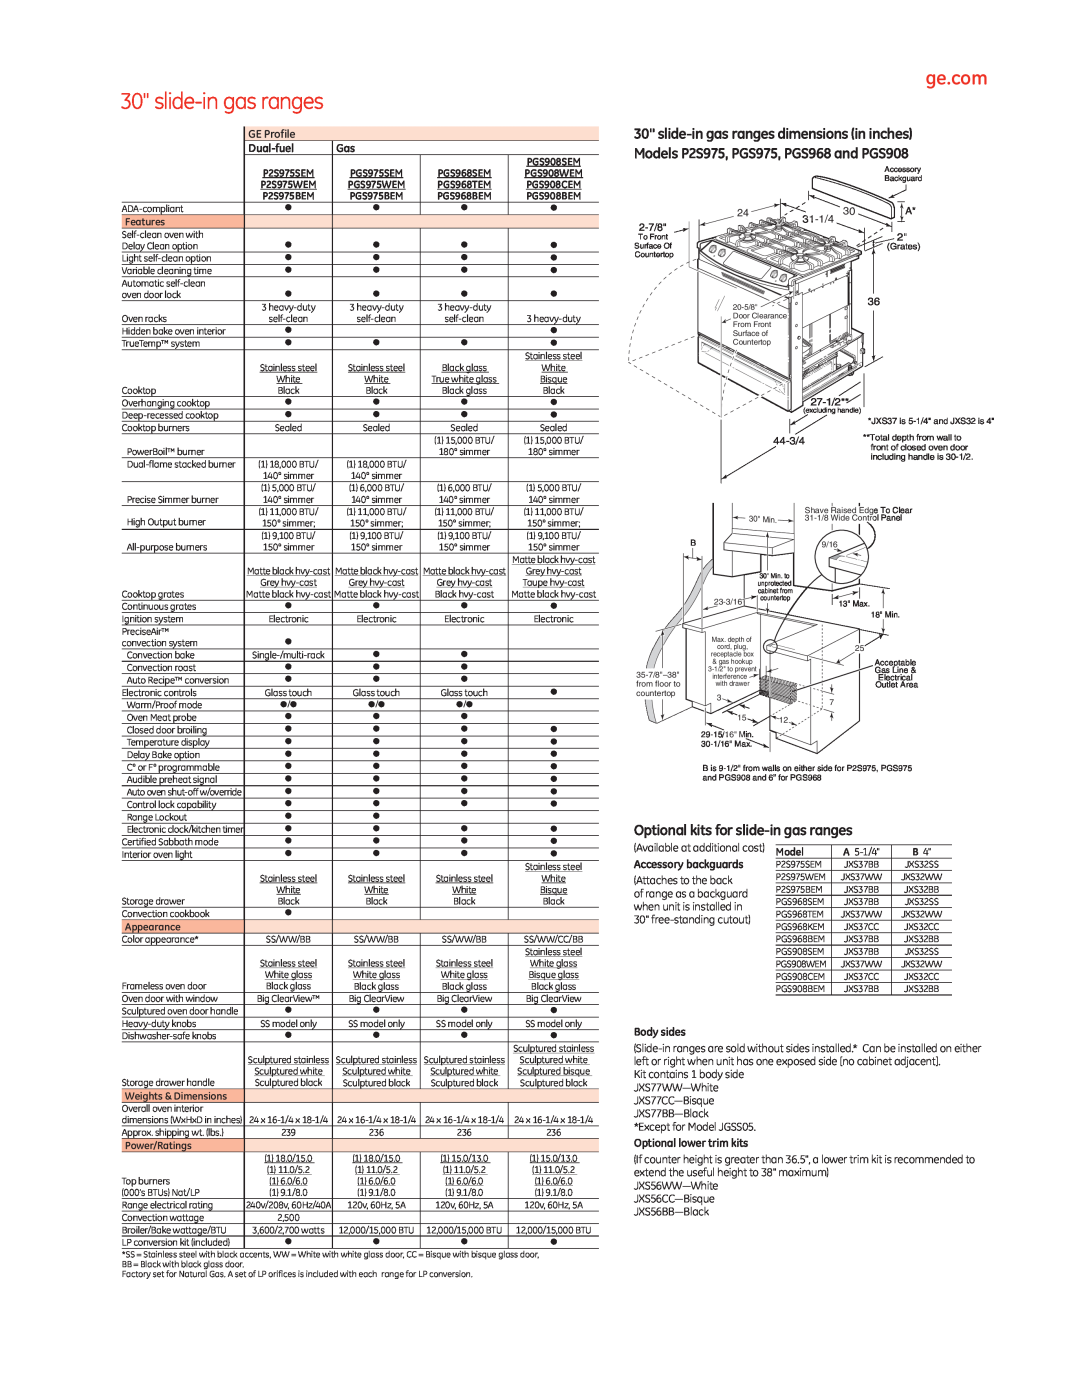 GE PGS968 owner manual RangesGas Slide-In, Operating Instructions, Care and Cleaning, Owner’s Manual, Consumer Support 